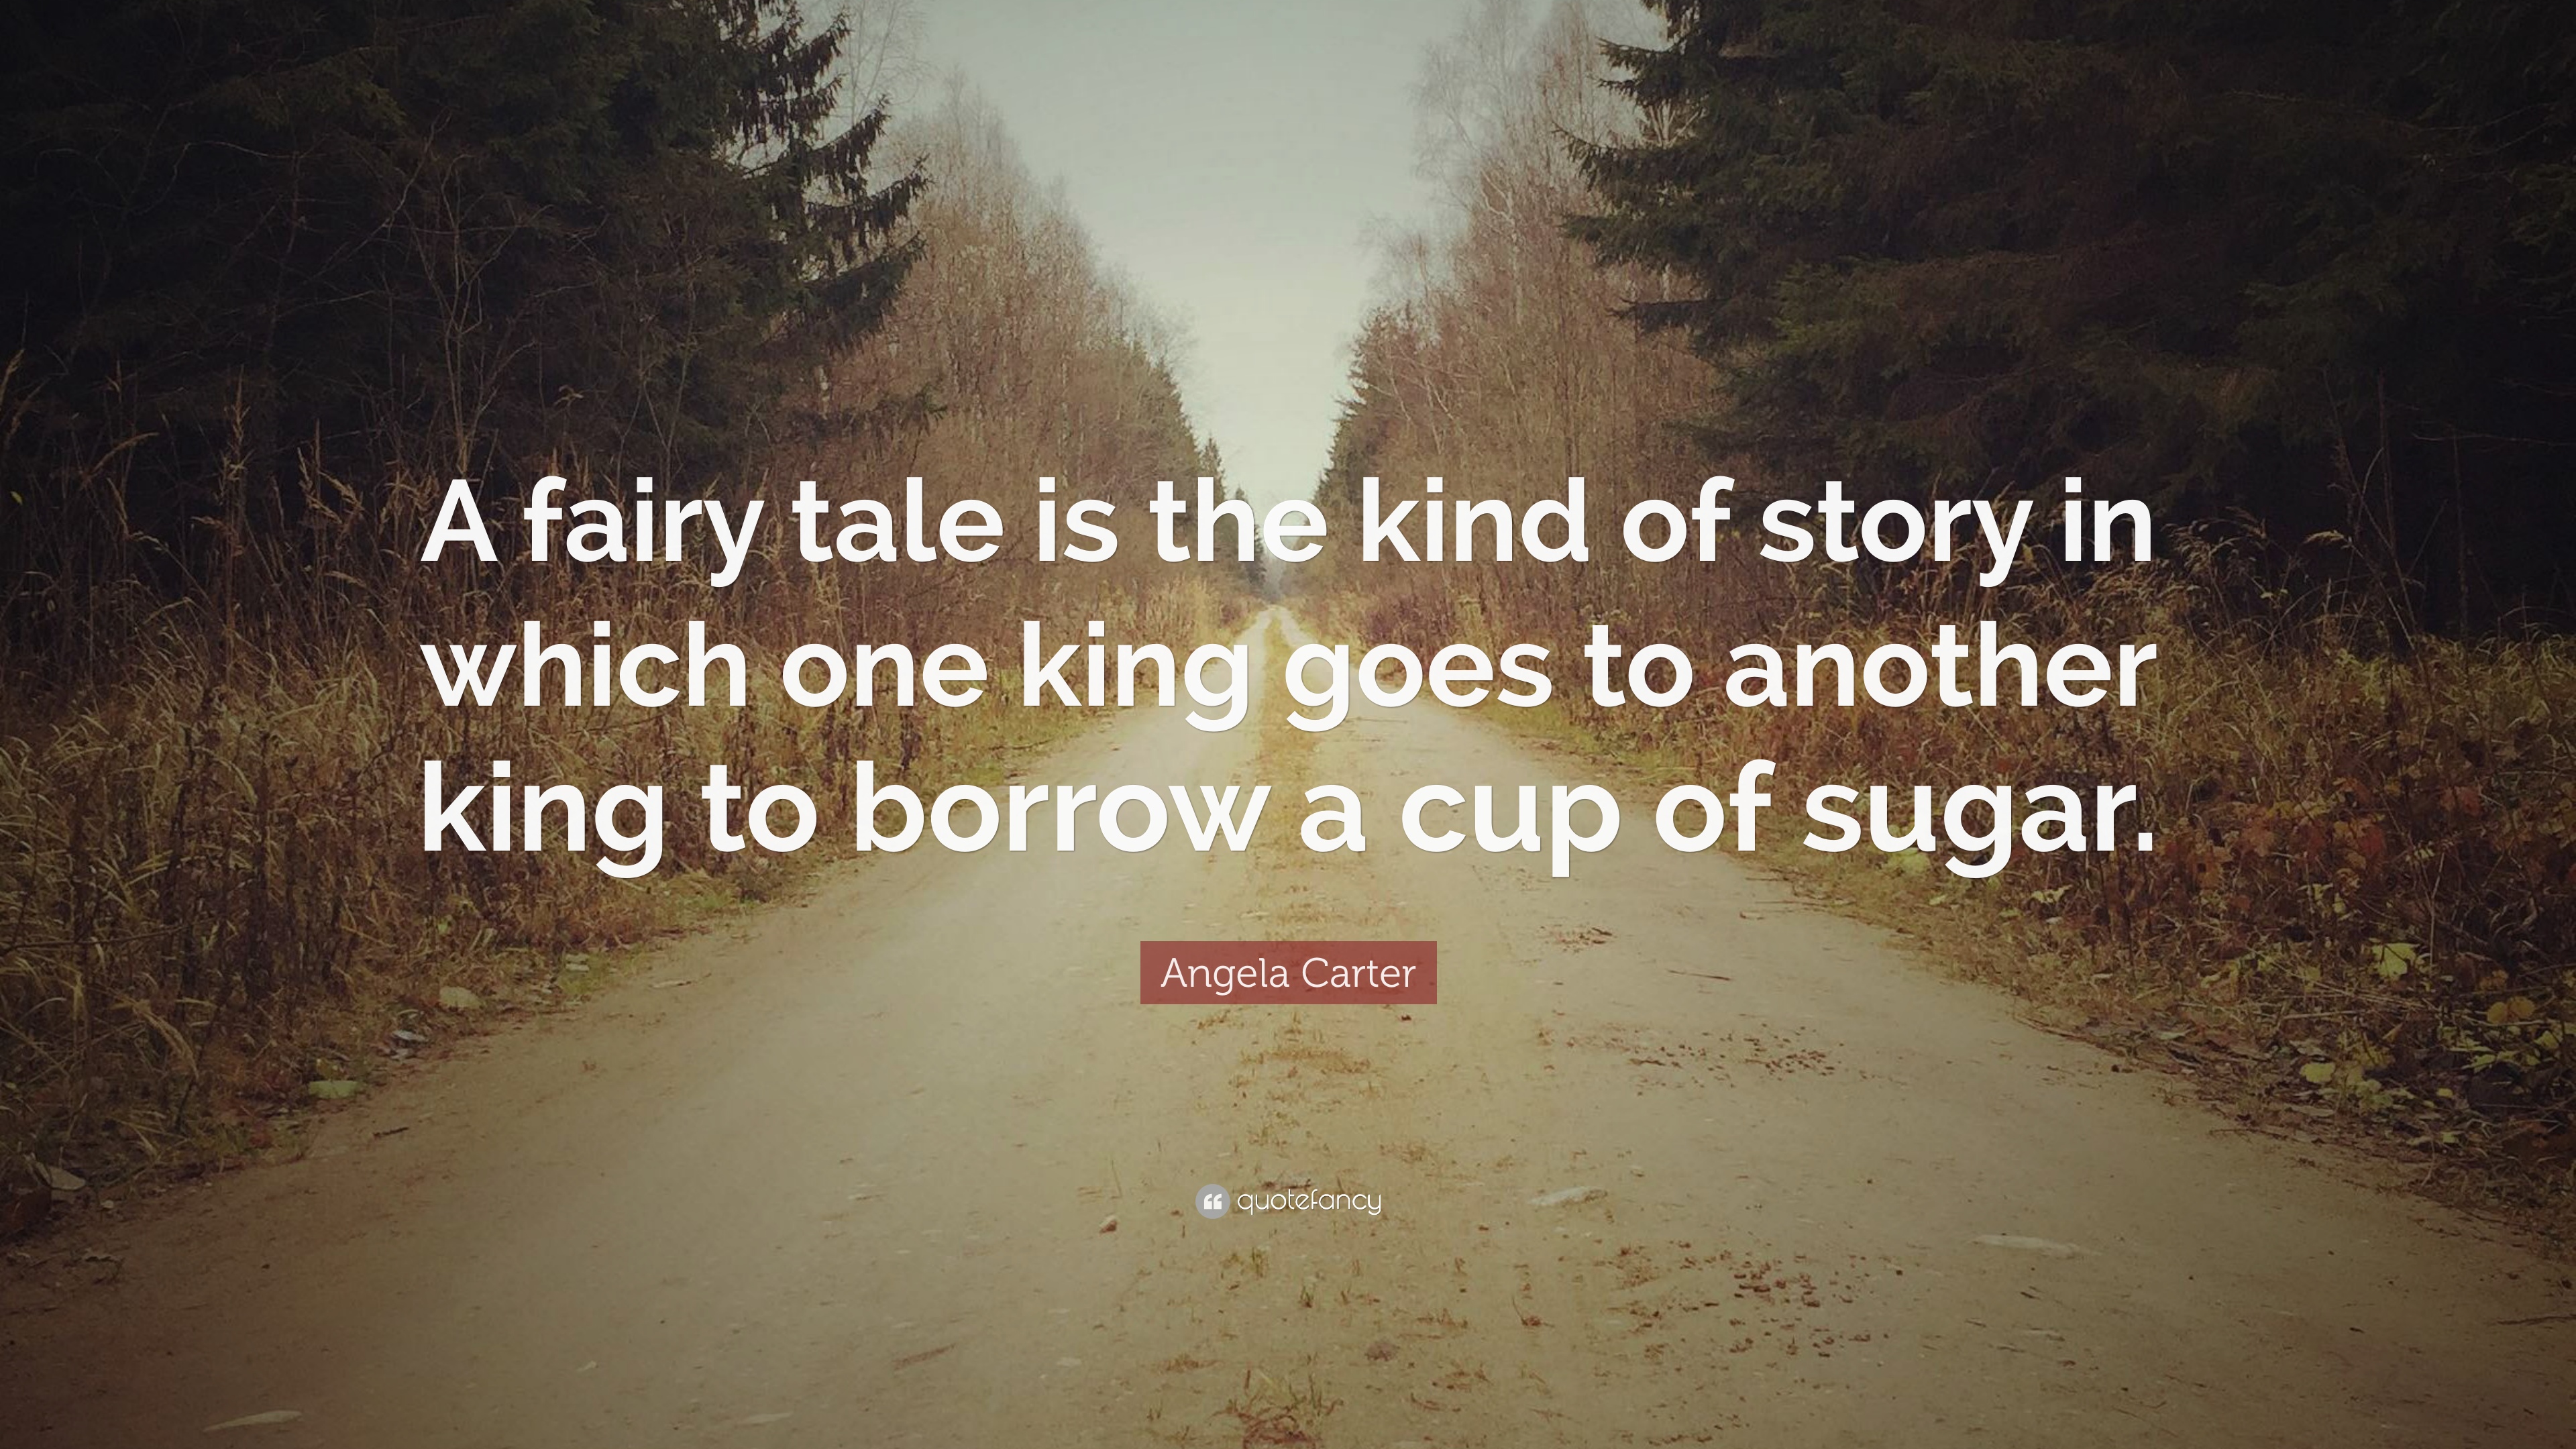 A fairy tale is the kind of story in which one king goes to another king to borrow a cup of sugar. angela carter